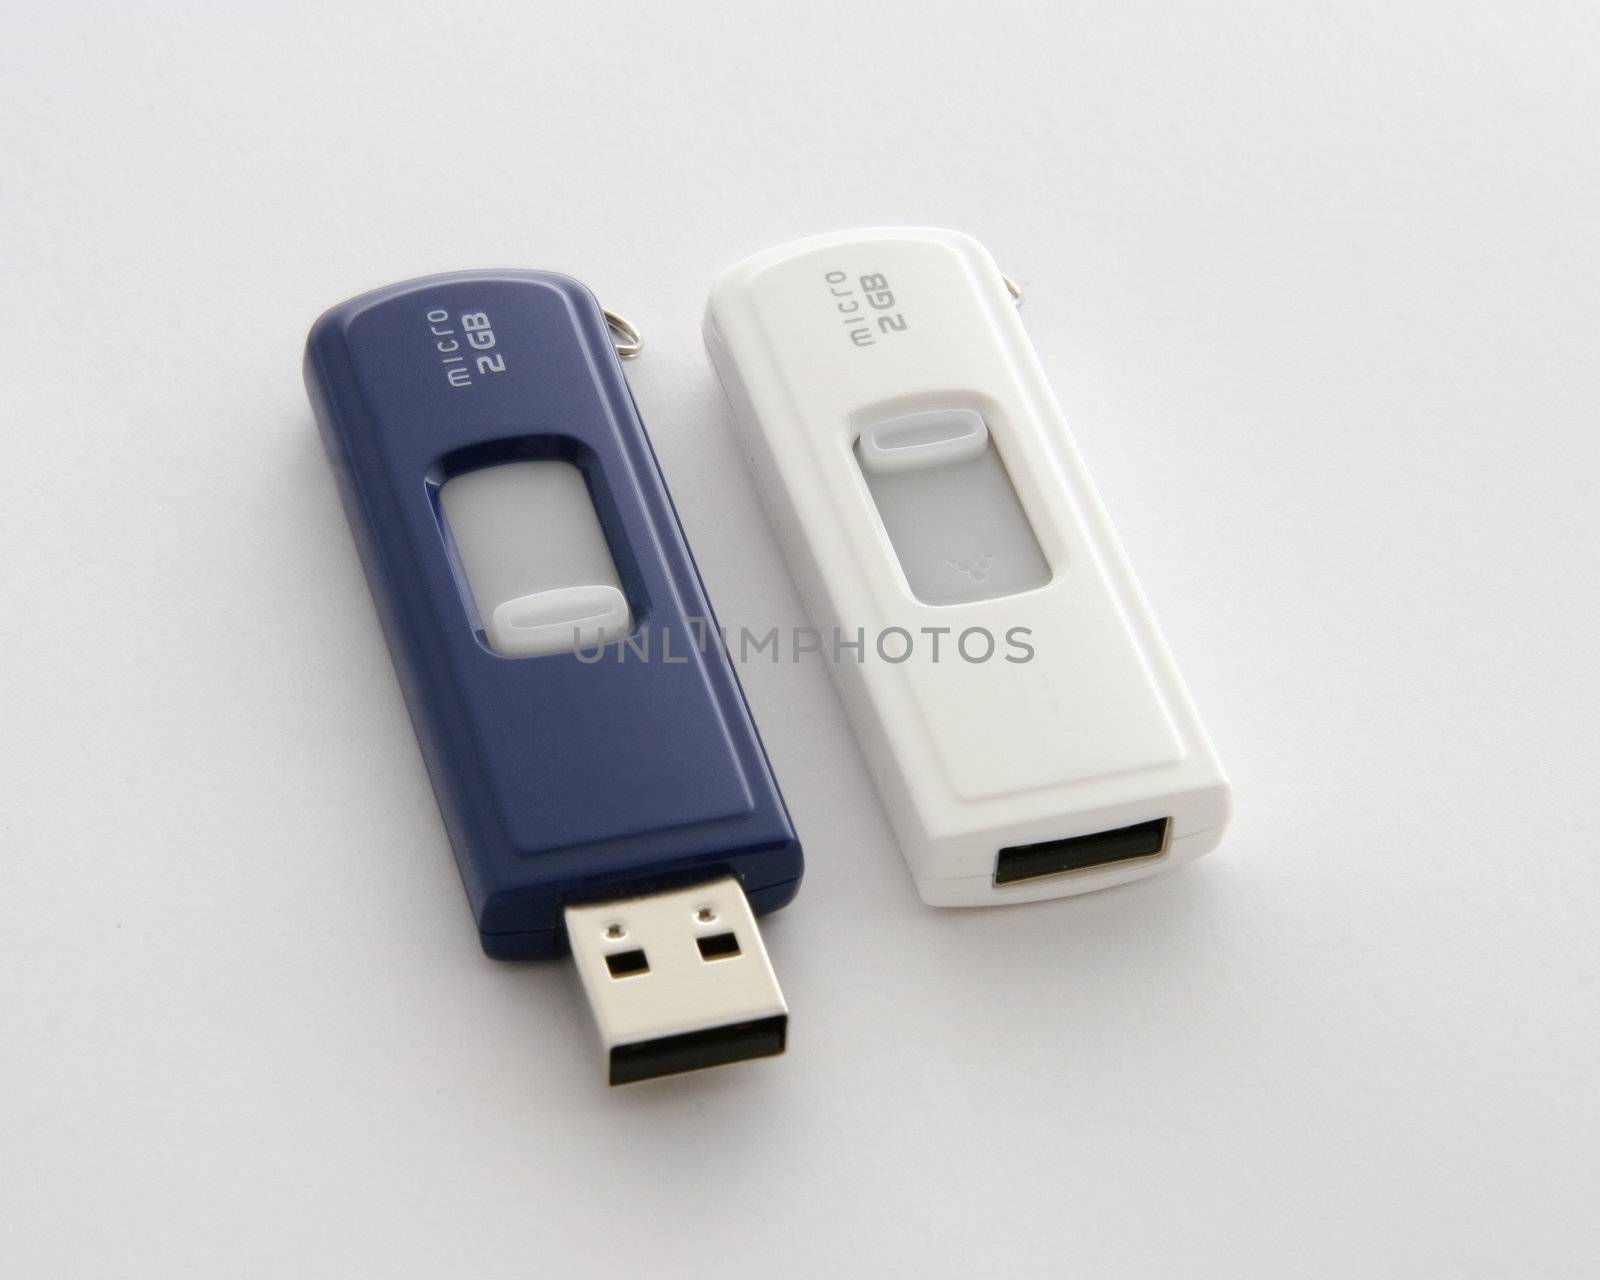 two flash drives used to transfer data from computer to computer